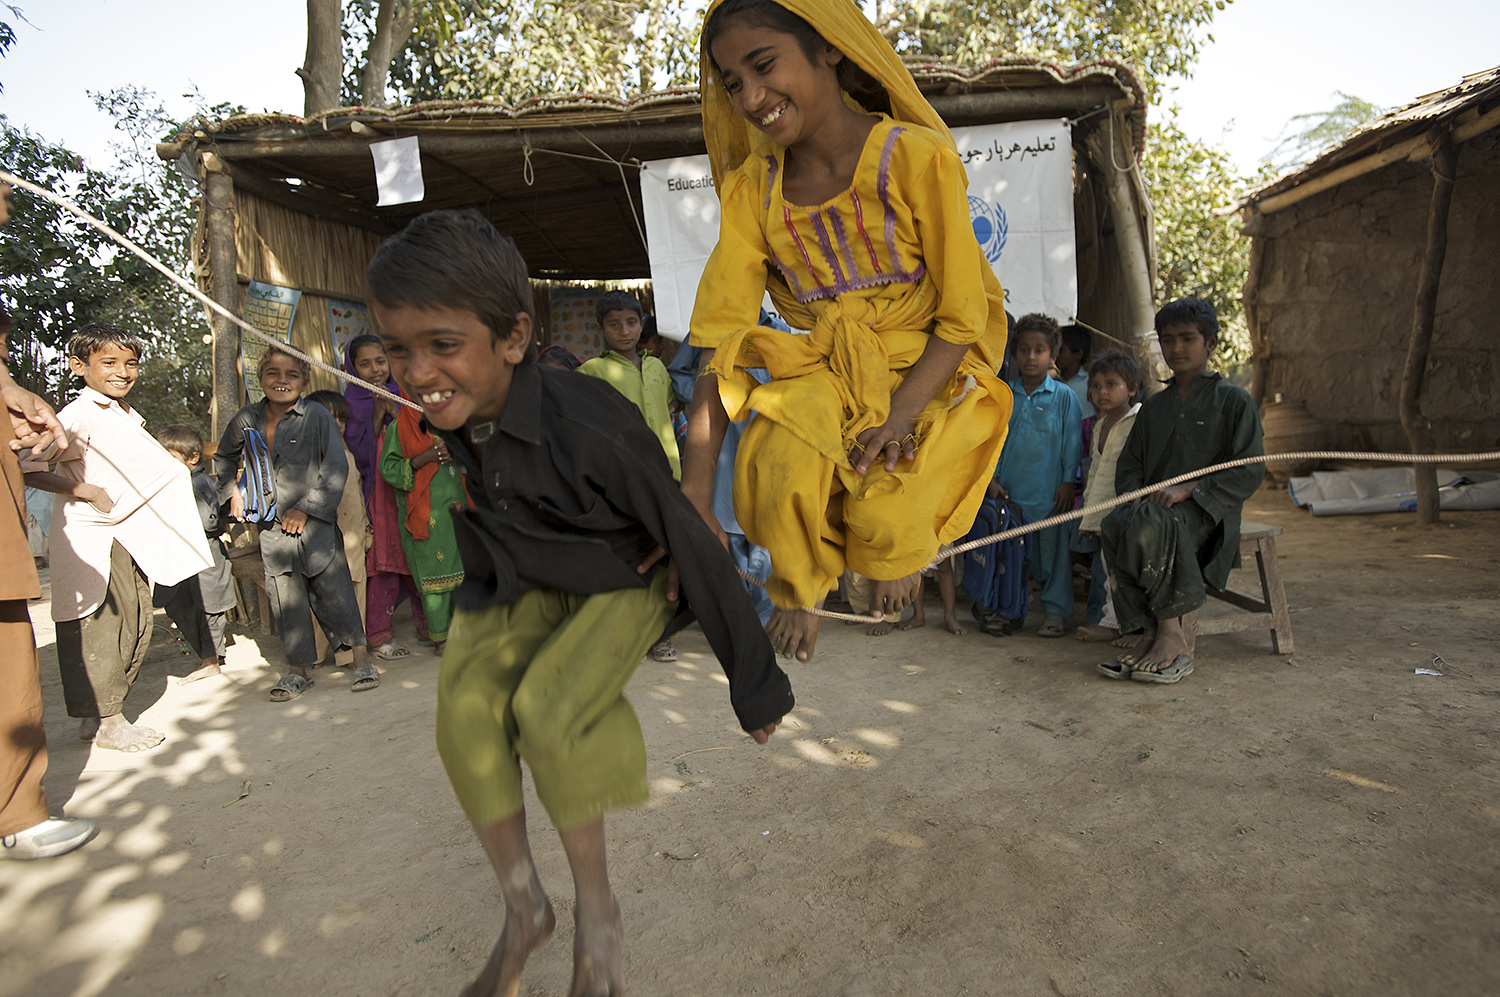 East Indian school boy and girl playing jumprope.